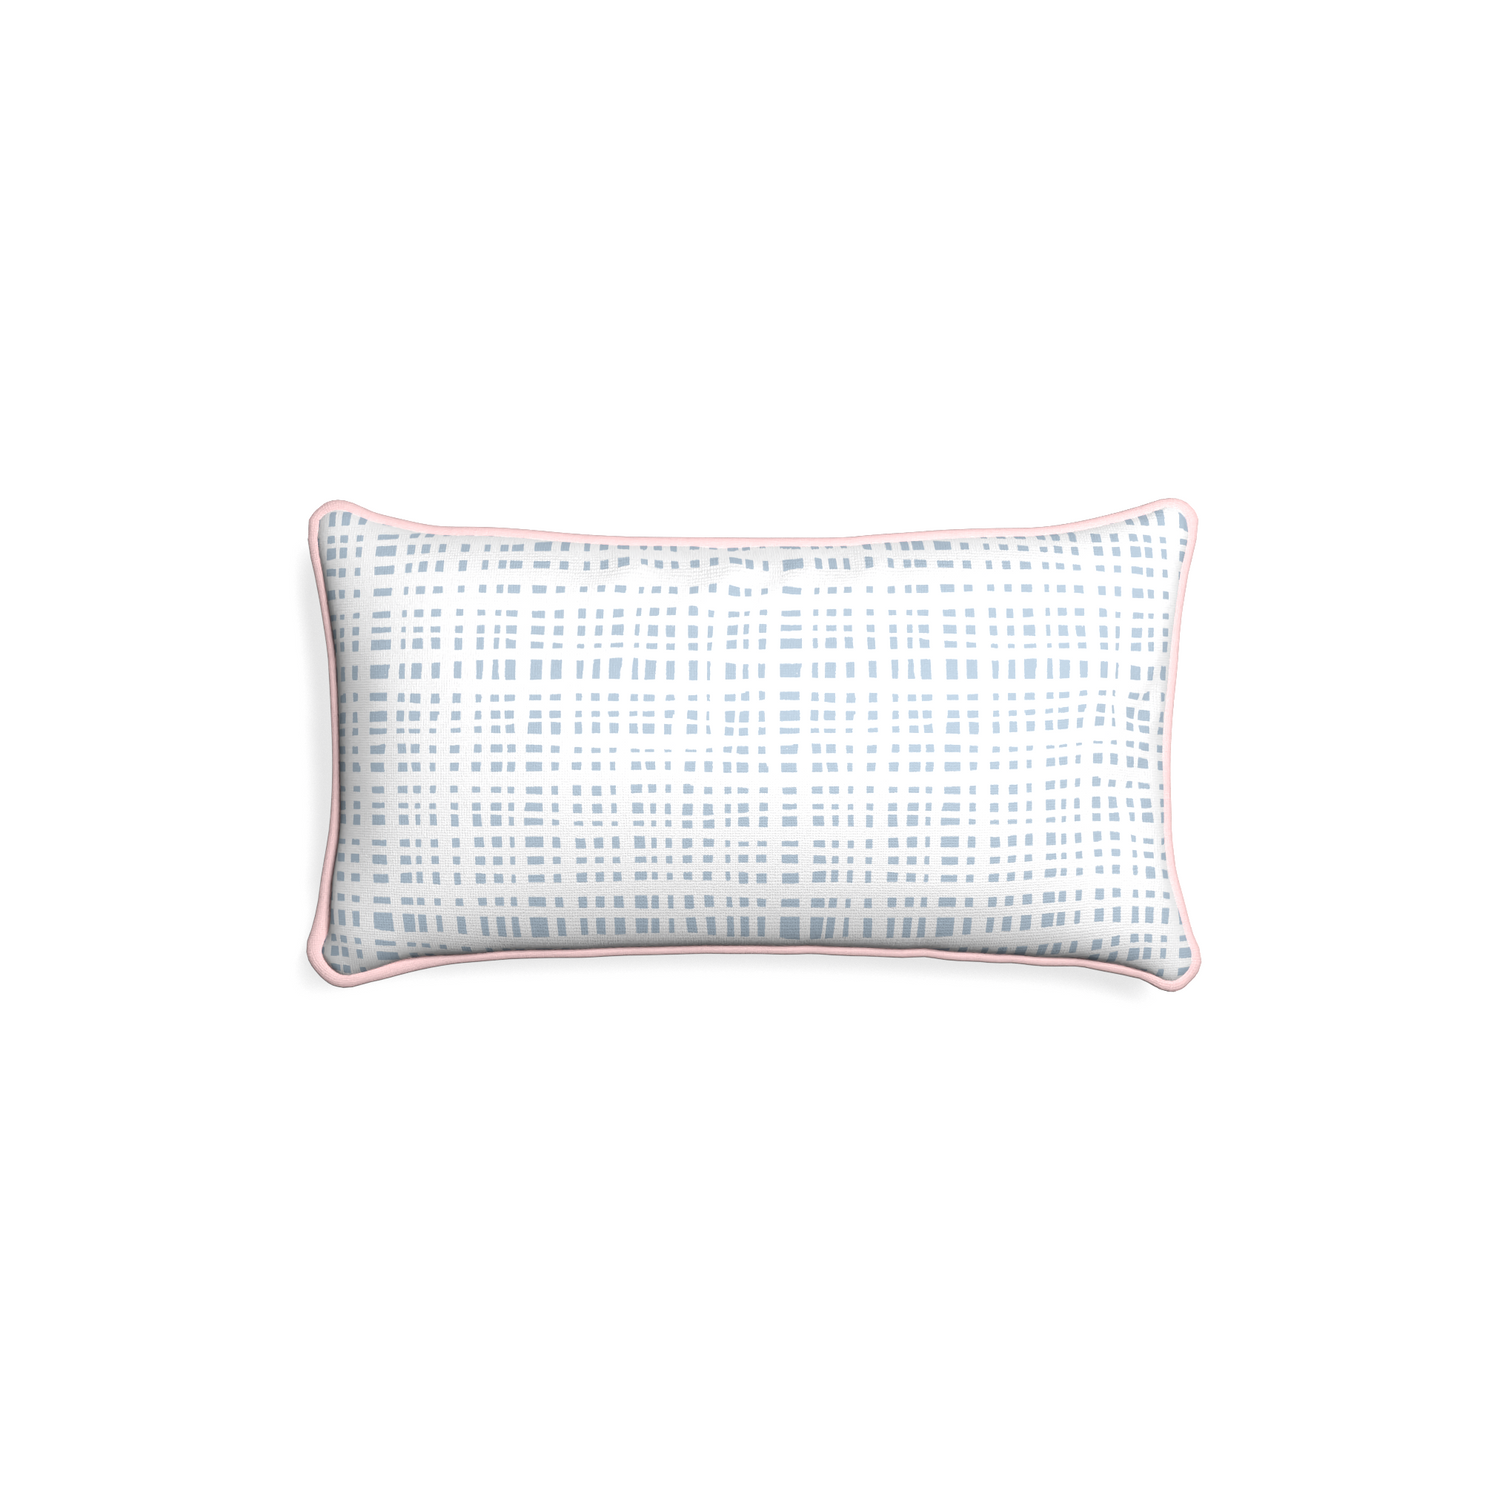 Petite-lumbar ginger custom plaid sky bluepillow with petal piping on white background